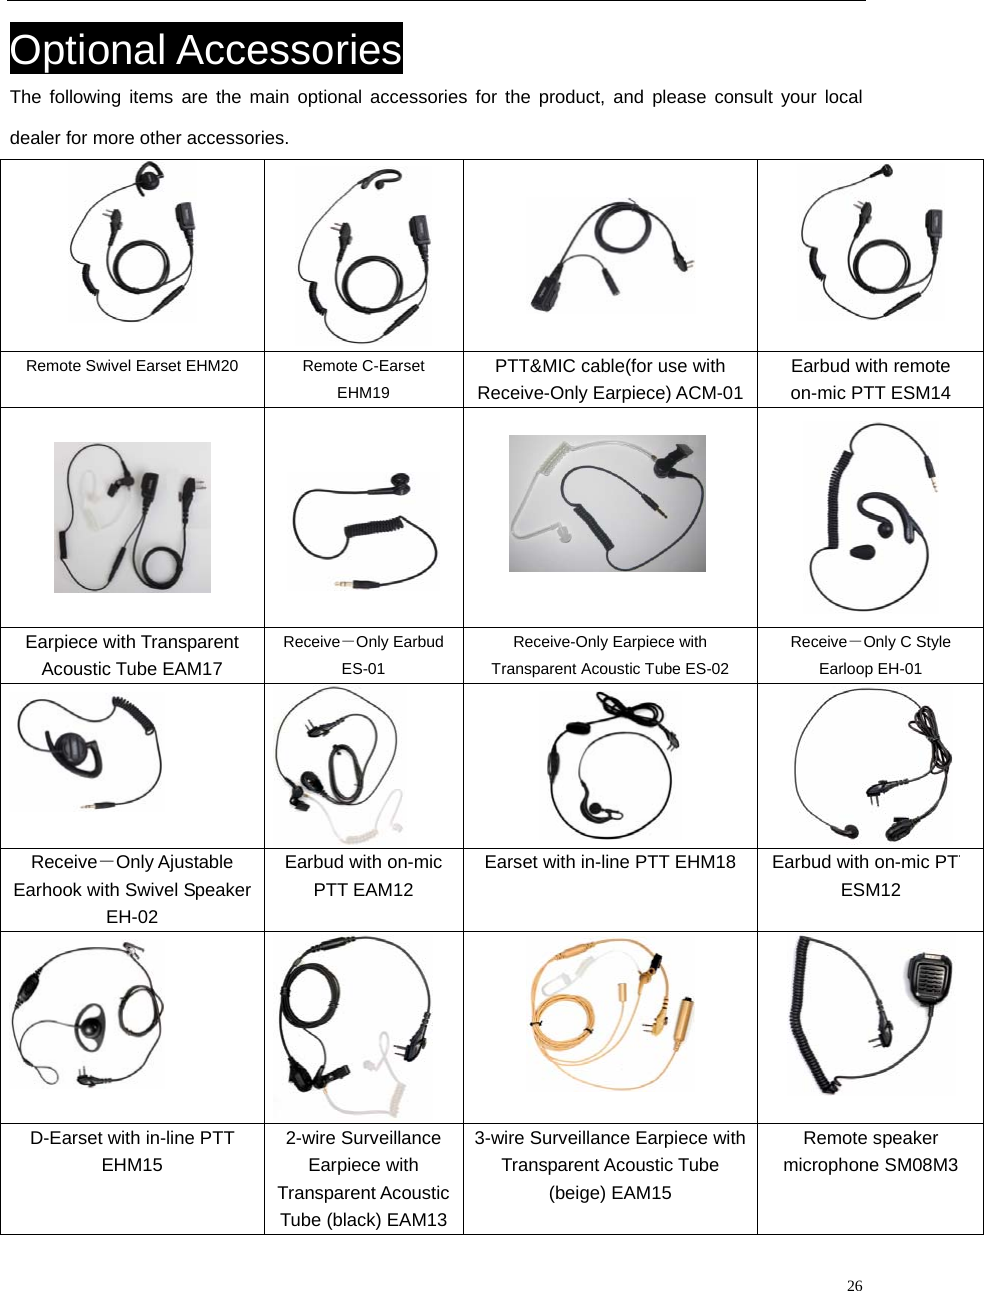                                                                                                             26Optional Accessories The following items are the main optional accessories for the product, and please consult your local dealer for more other accessories.     Remote Swivel Earset EHM20 Remote C-Earset   EHM19 PTT&amp;MIC cable(for use with Receive-Only Earpiece) ACM-01Earbud with remote on-mic PTT ESM14         Earpiece with Transparent Acoustic Tube EAM17 Receive－Only Earbud   ES-01 Receive-Only Earpiece with Transparent Acoustic Tube ES-02 Receive－Only C Style Earloop EH-01    Receive－Only Ajustable Earhook with Swivel Speaker EH-02 Earbud with on-mic PTT EAM12 Earset with in-line PTT EHM18  Earbud with on-mic PTTESM12    D-Earset with in-line PTT EHM15 2-wire Surveillance Earpiece with Transparent Acoustic Tube (black) EAM133-wire Surveillance Earpiece with Transparent Acoustic Tube (beige) EAM15 Remote speaker microphone SM08M3